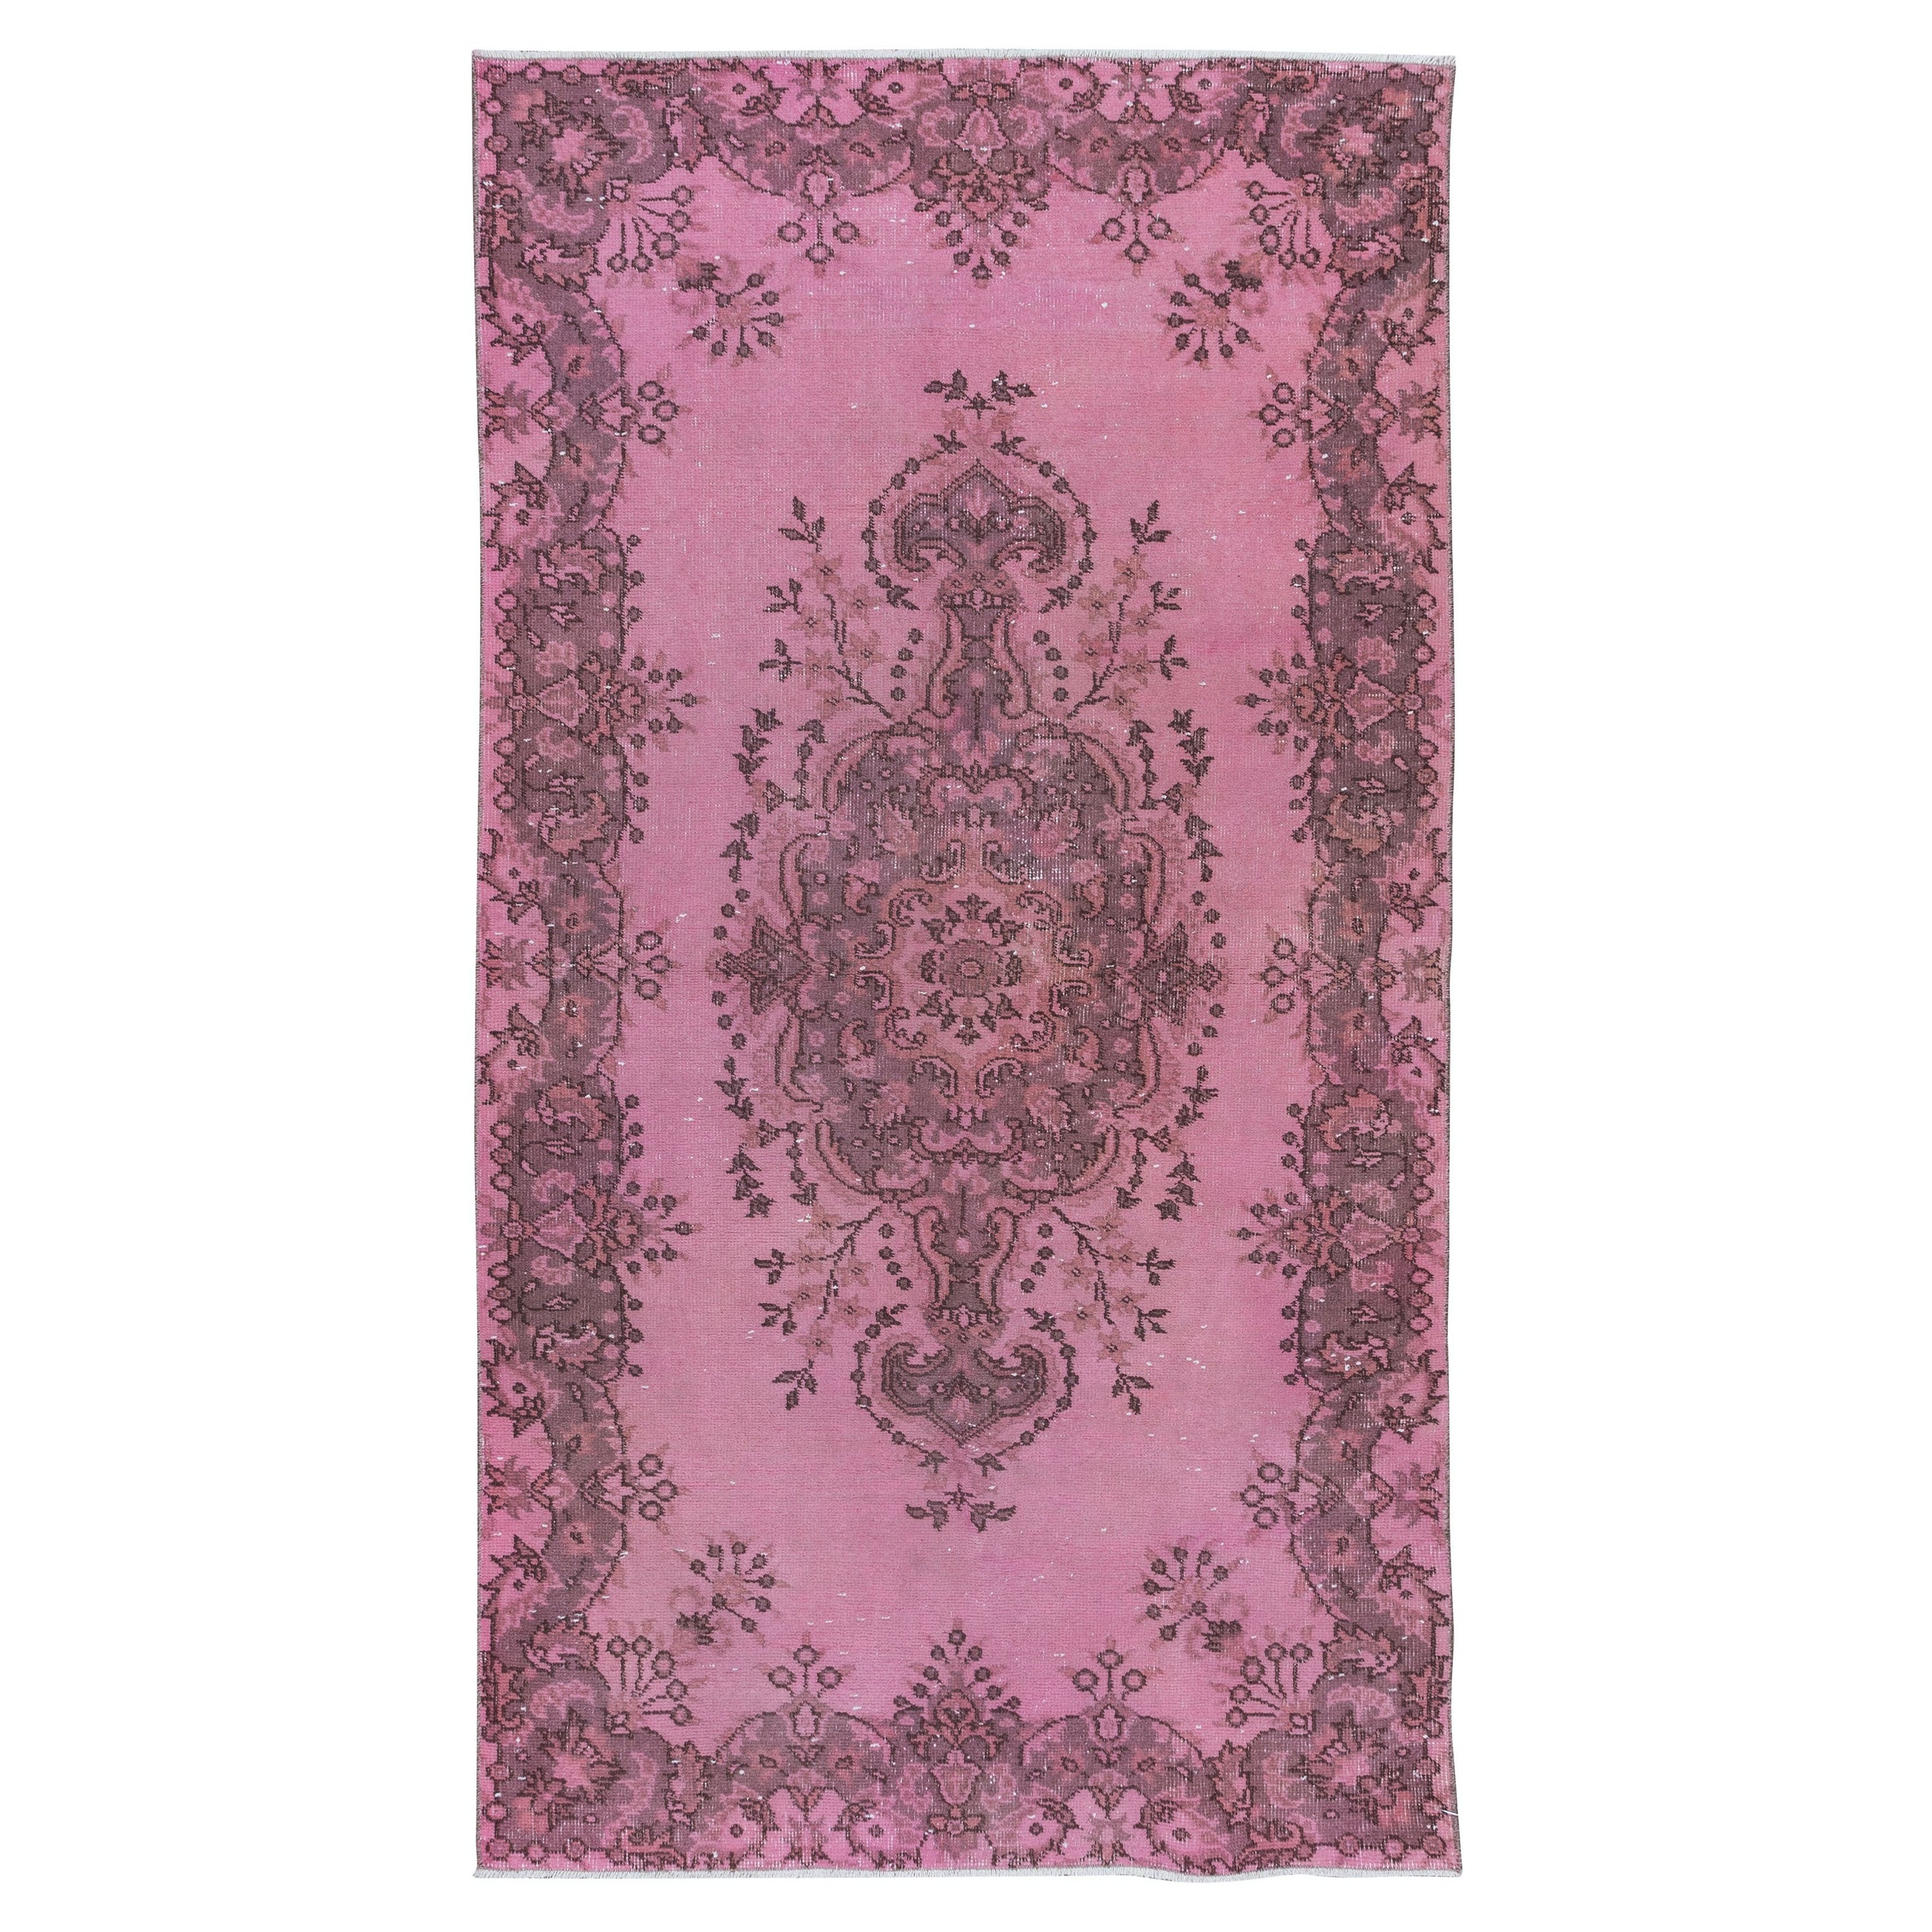 4x7 Ft Handmade Turkish Accent Rug in Pink, Rustic Small Kitchen Rug